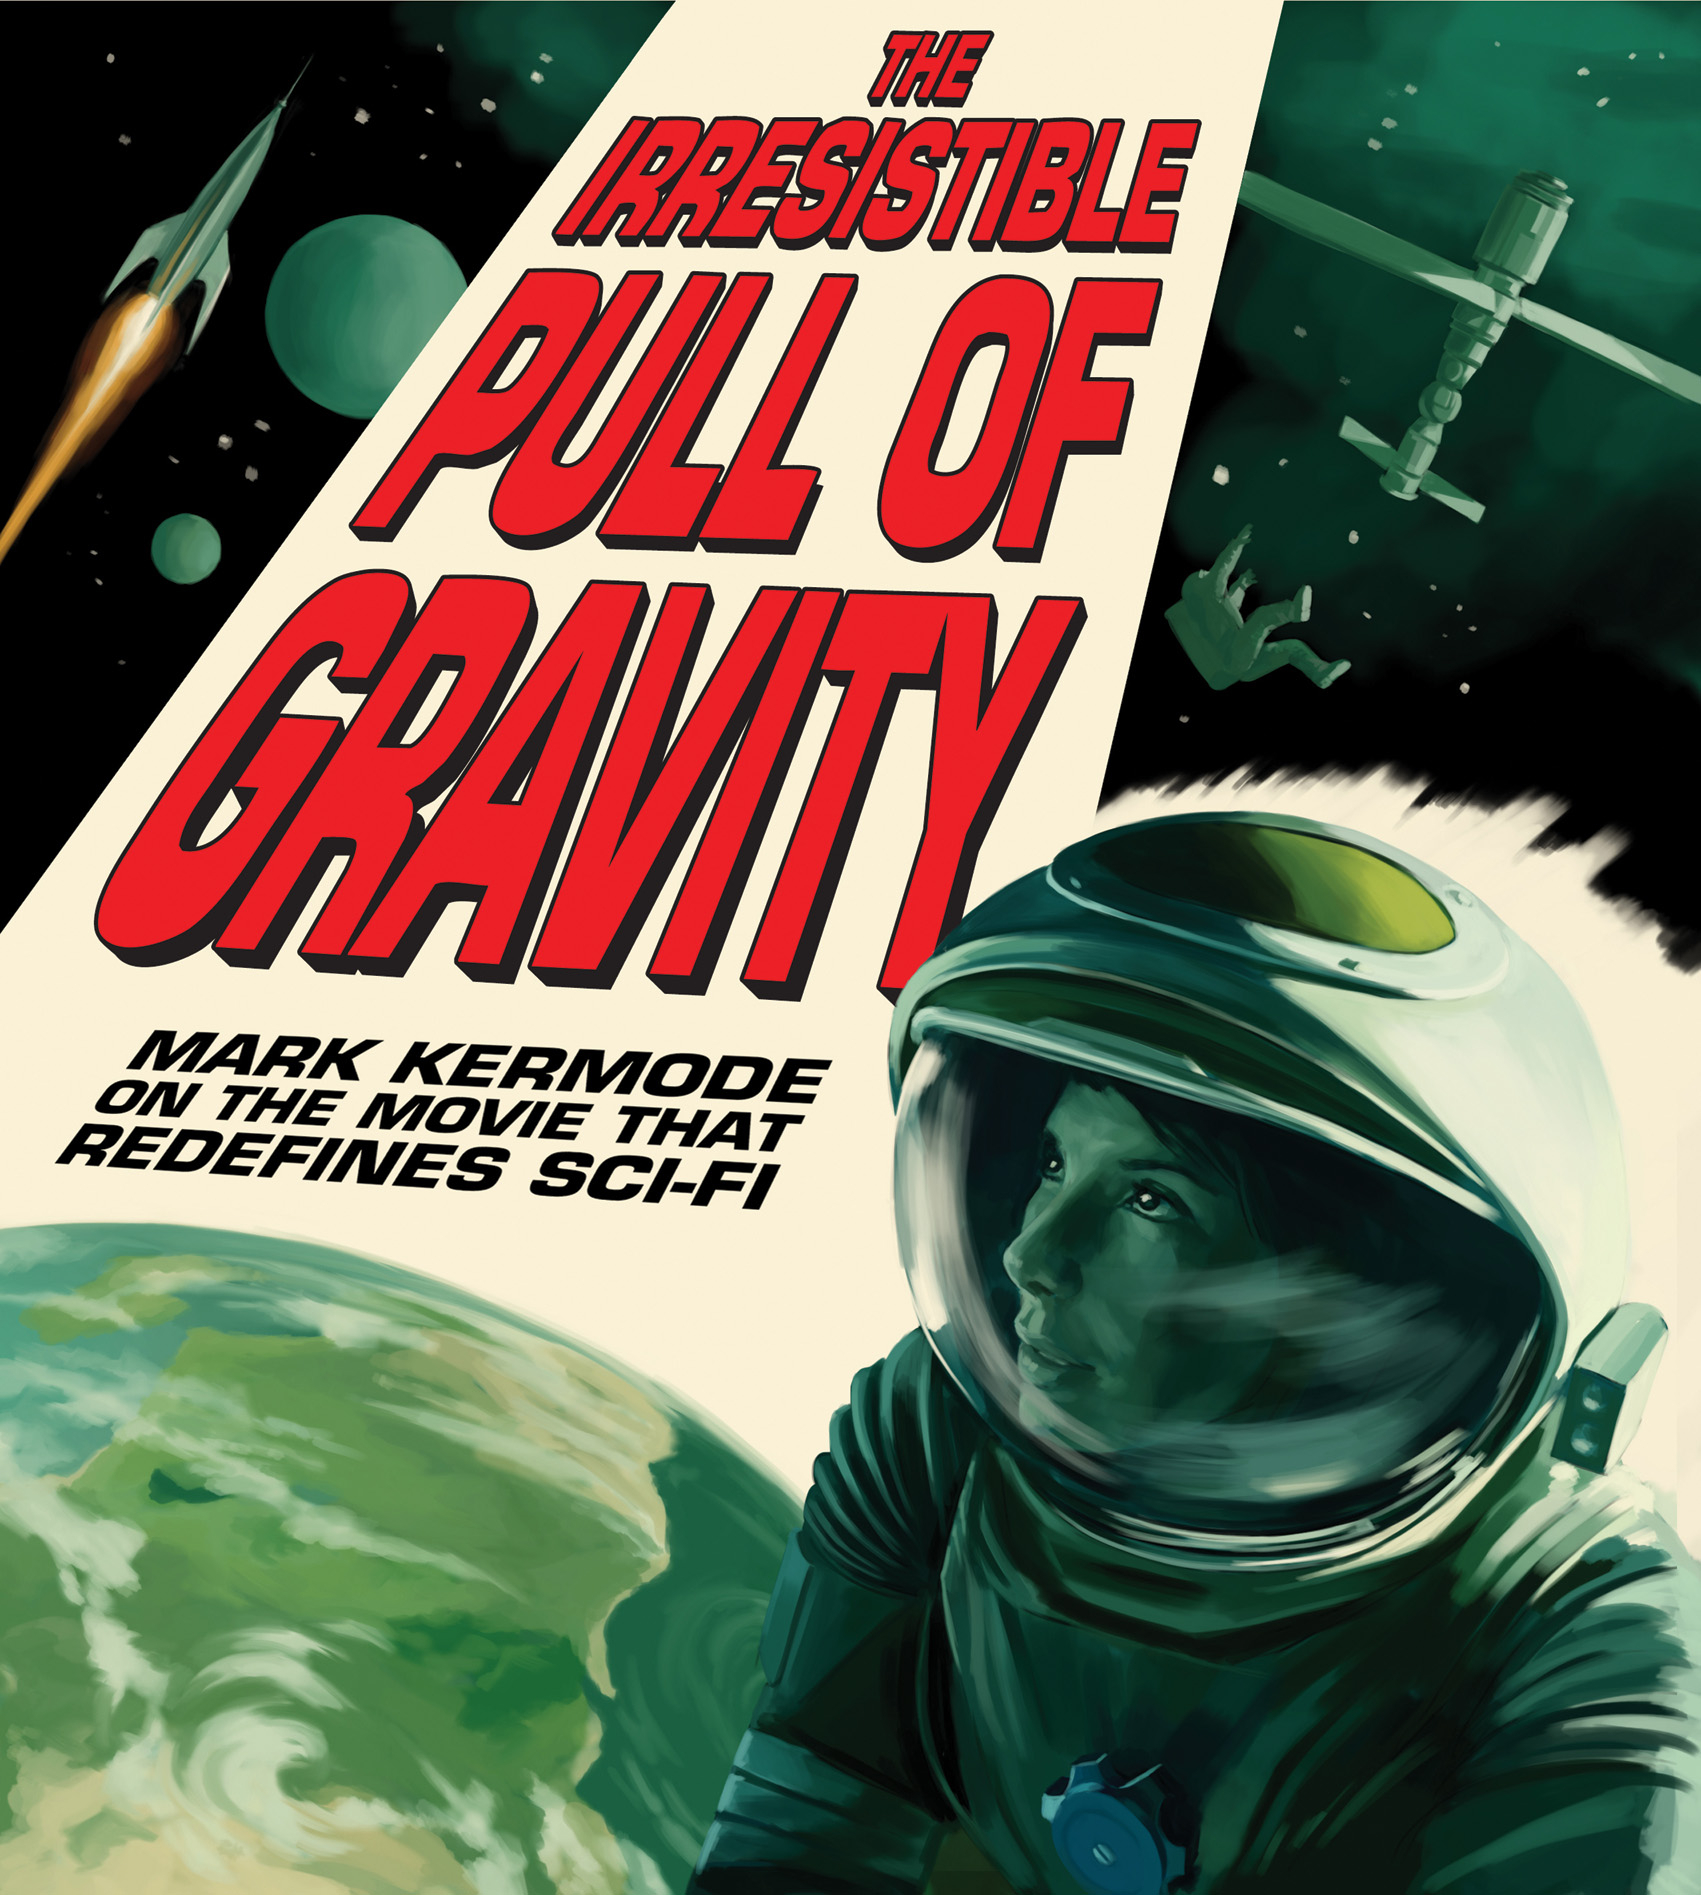 The Irresistible Pull Of Gravity